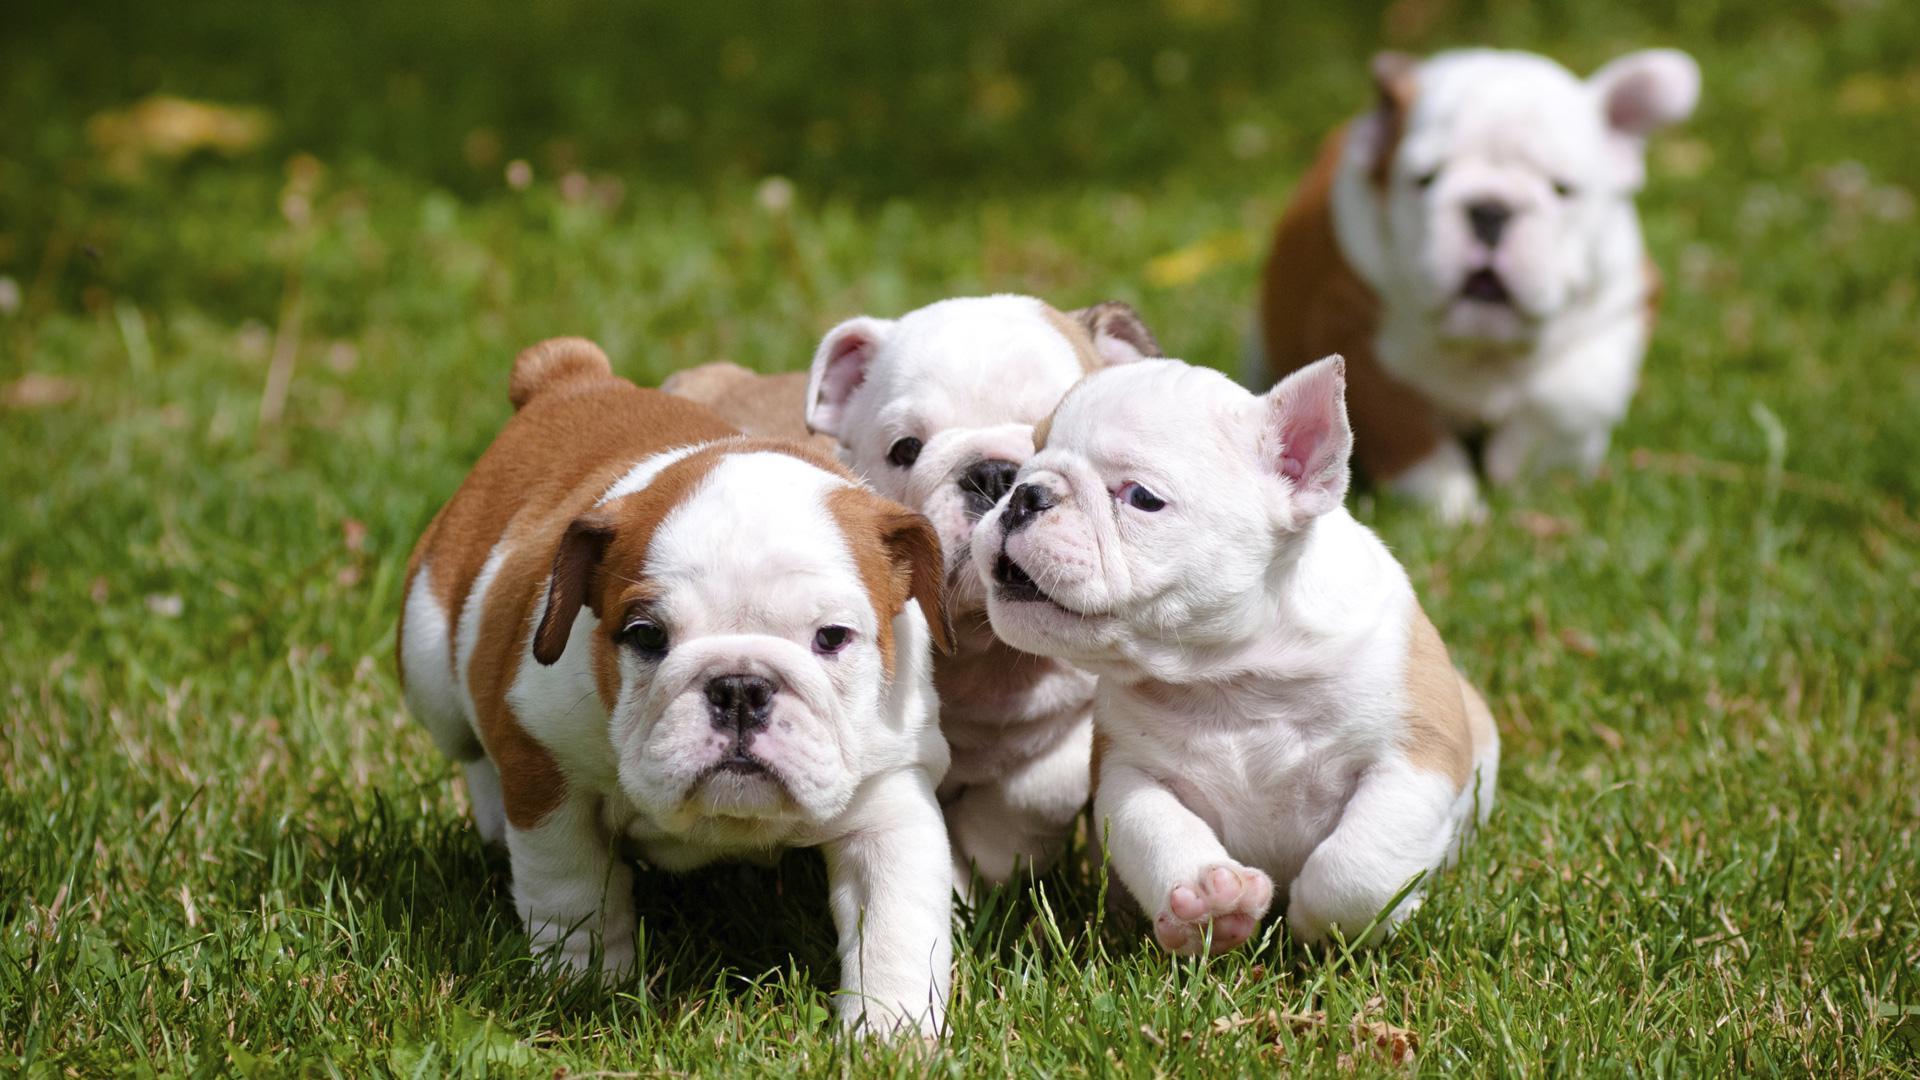 Group of Cute Baby Bull Dogs Wallpaper